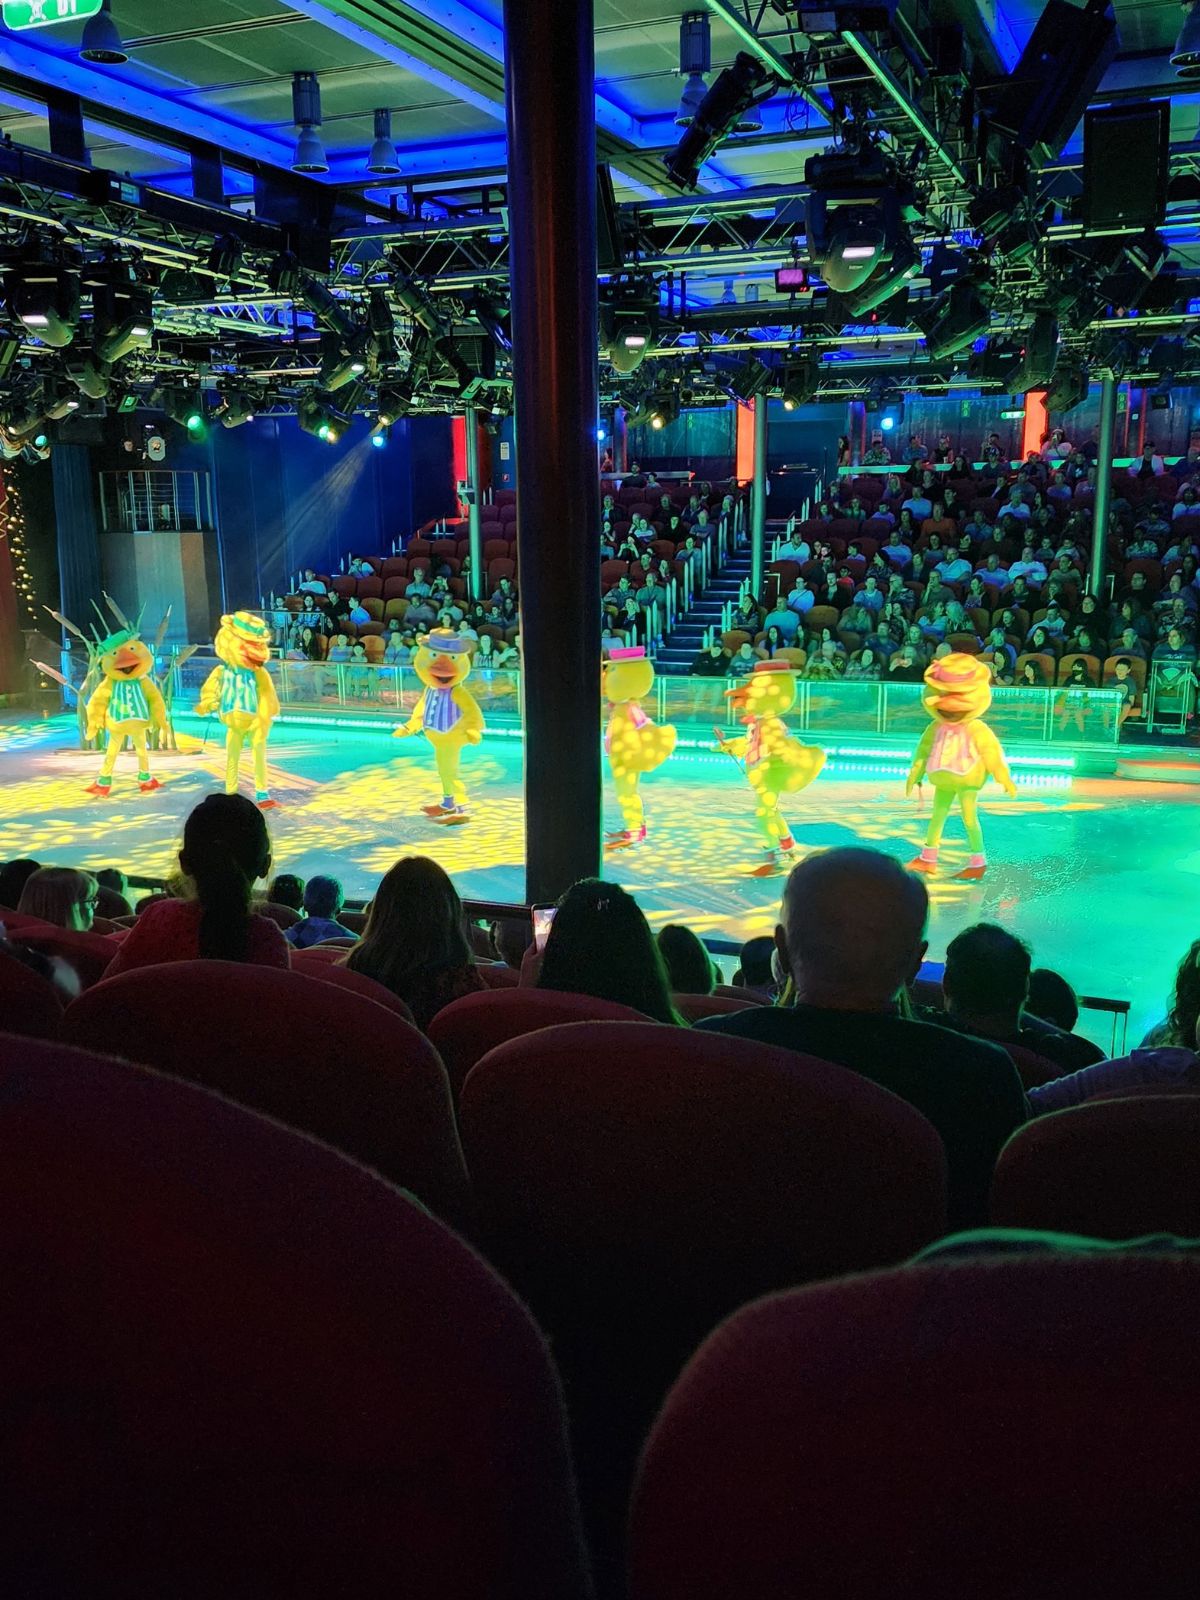 A view of the Frozen in Time show on the Oasis of the Seas. 6 people are dressed up like ducks and are twirling around on ice skates.